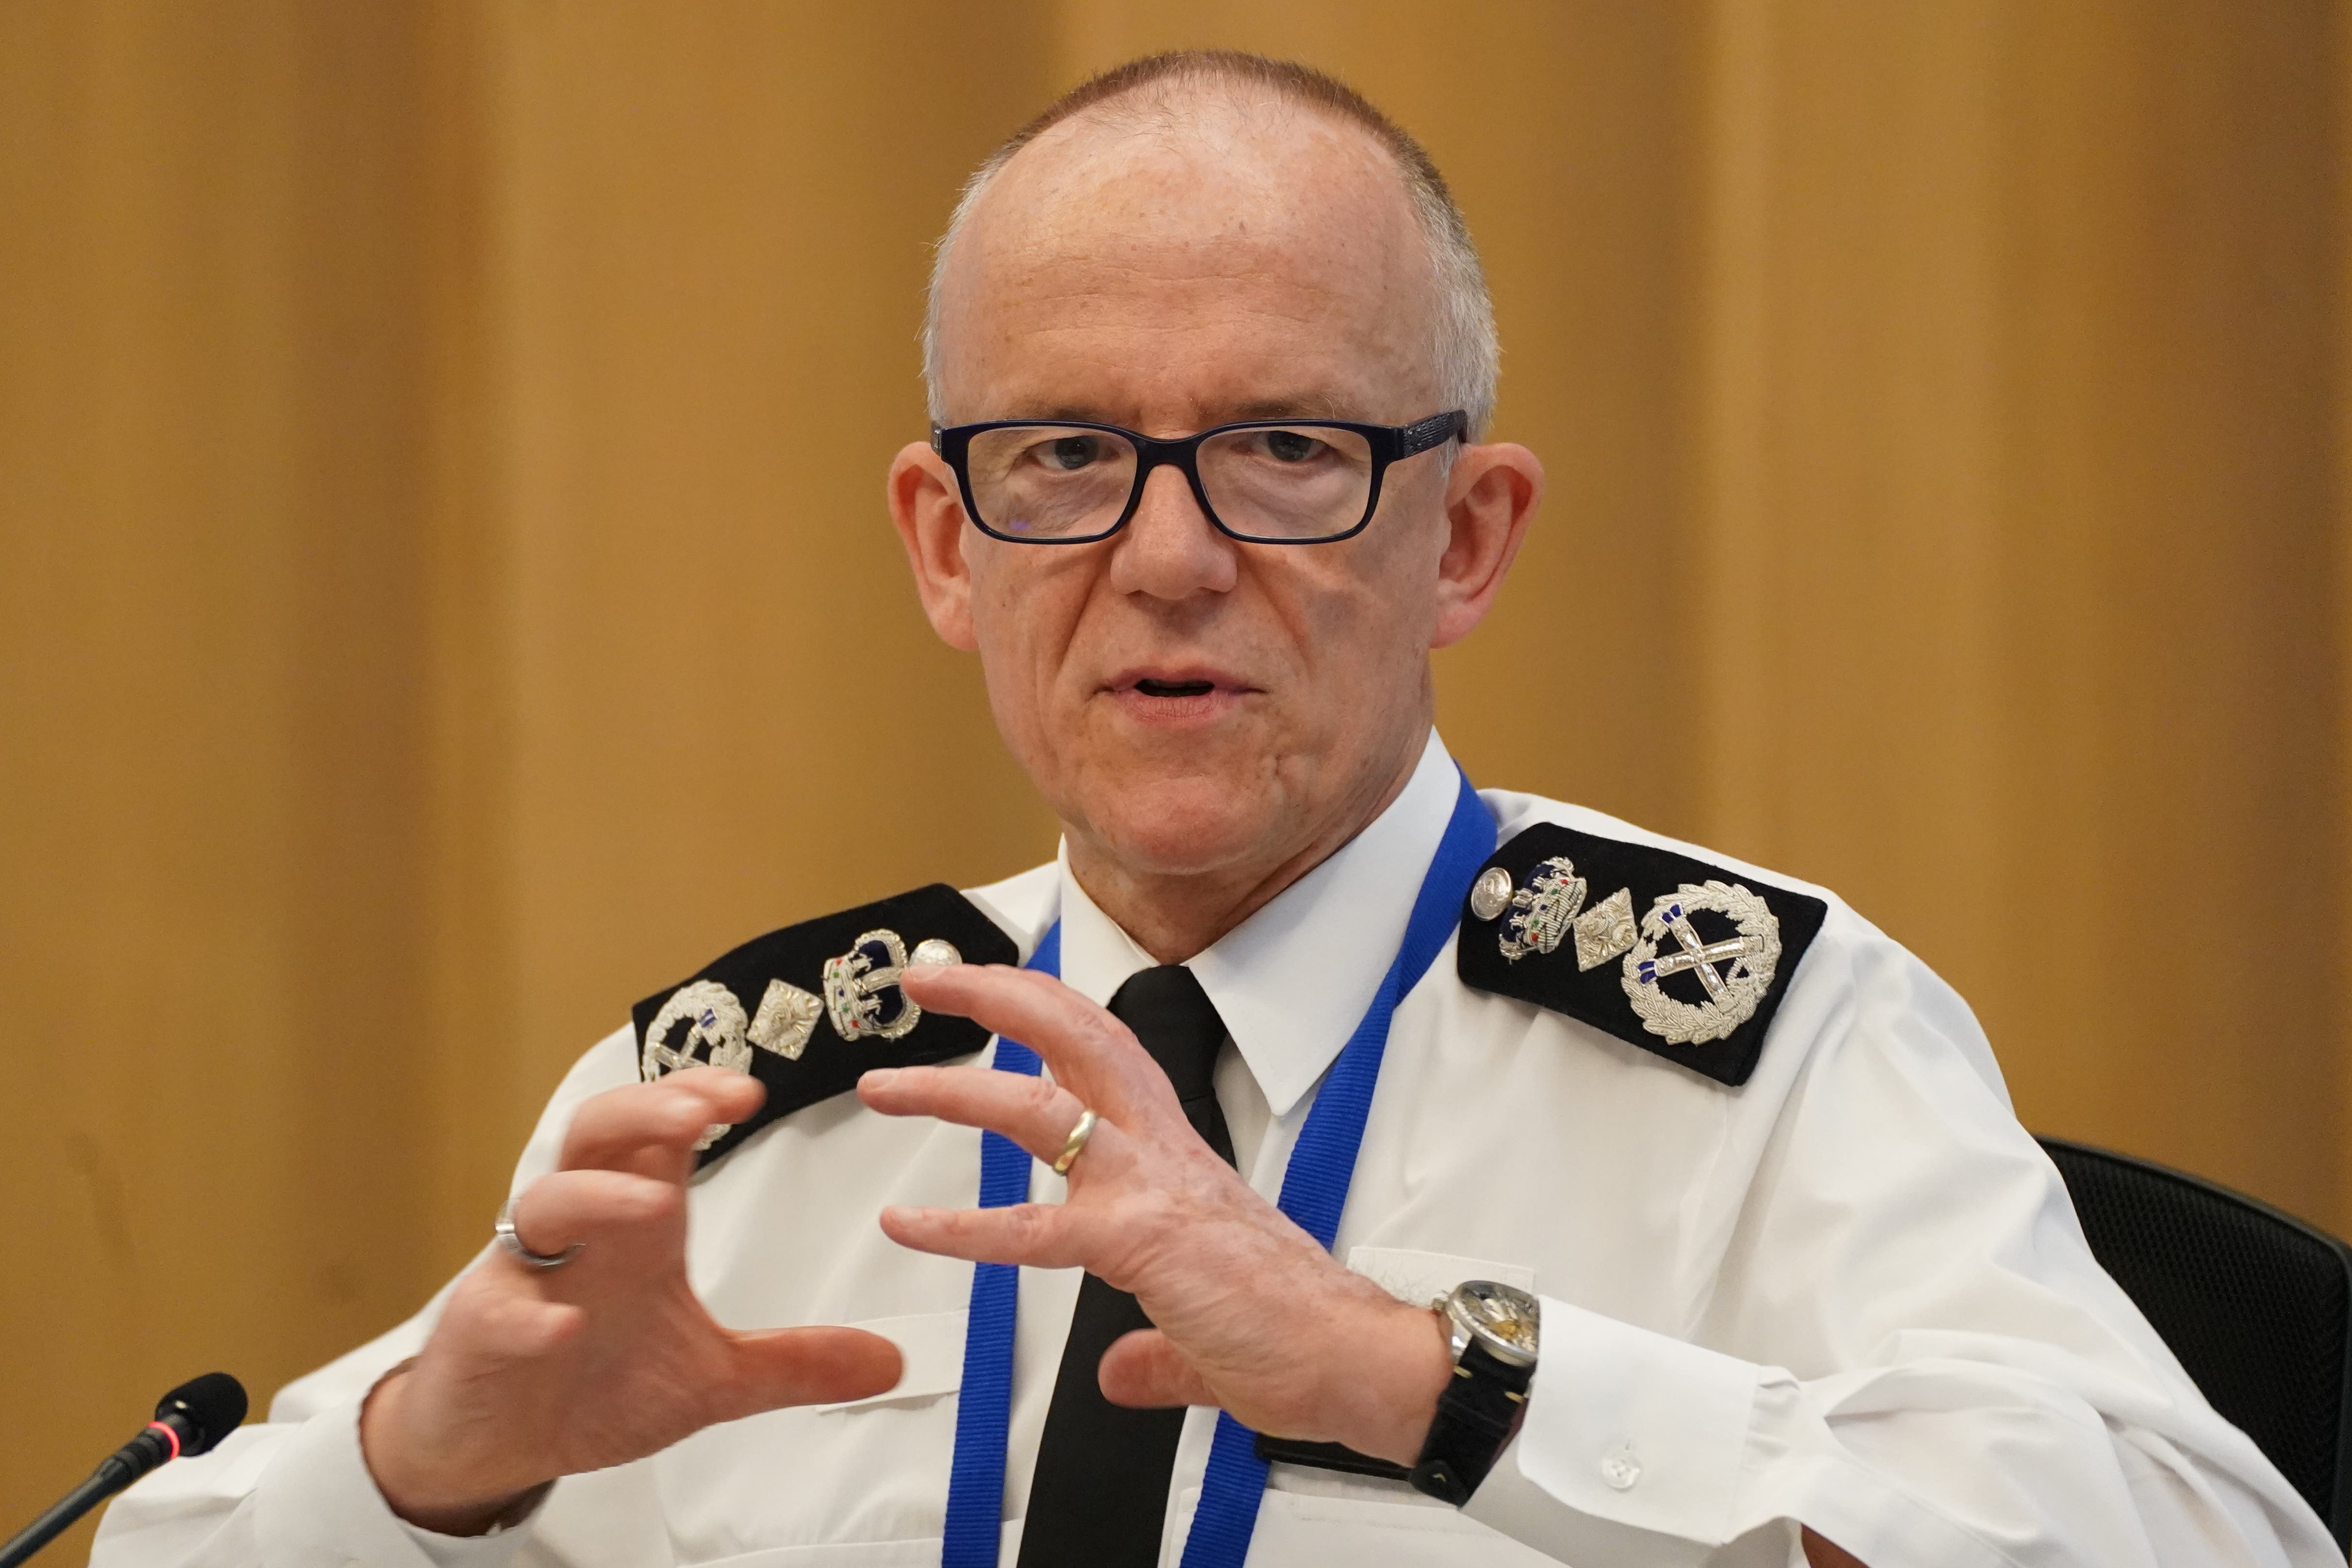 Sir Mark Rowley has insisted there is “momentum” to overhaul the Metropolitan Police in the wake of a damning Casey Review